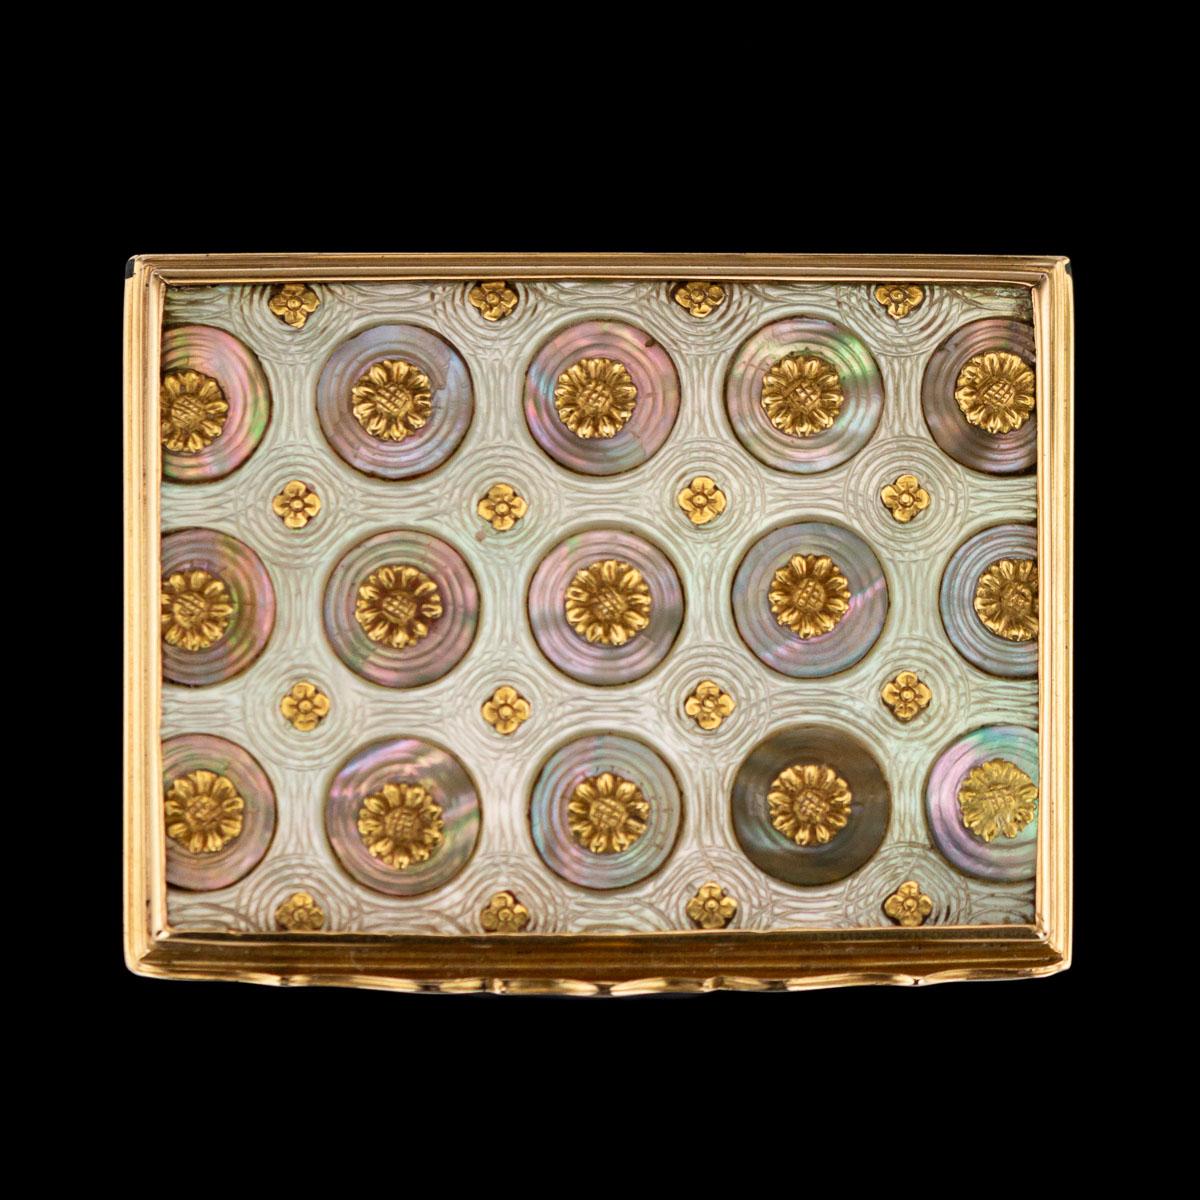 Antique mid-18th century French magnificent 18-karat gold-mounted on mother of pearl snuff box, of rectangular shape, the cover with a panel of engraved mother of pearl inset with roundels of darker shell, each centred with a gold flowerhead, with